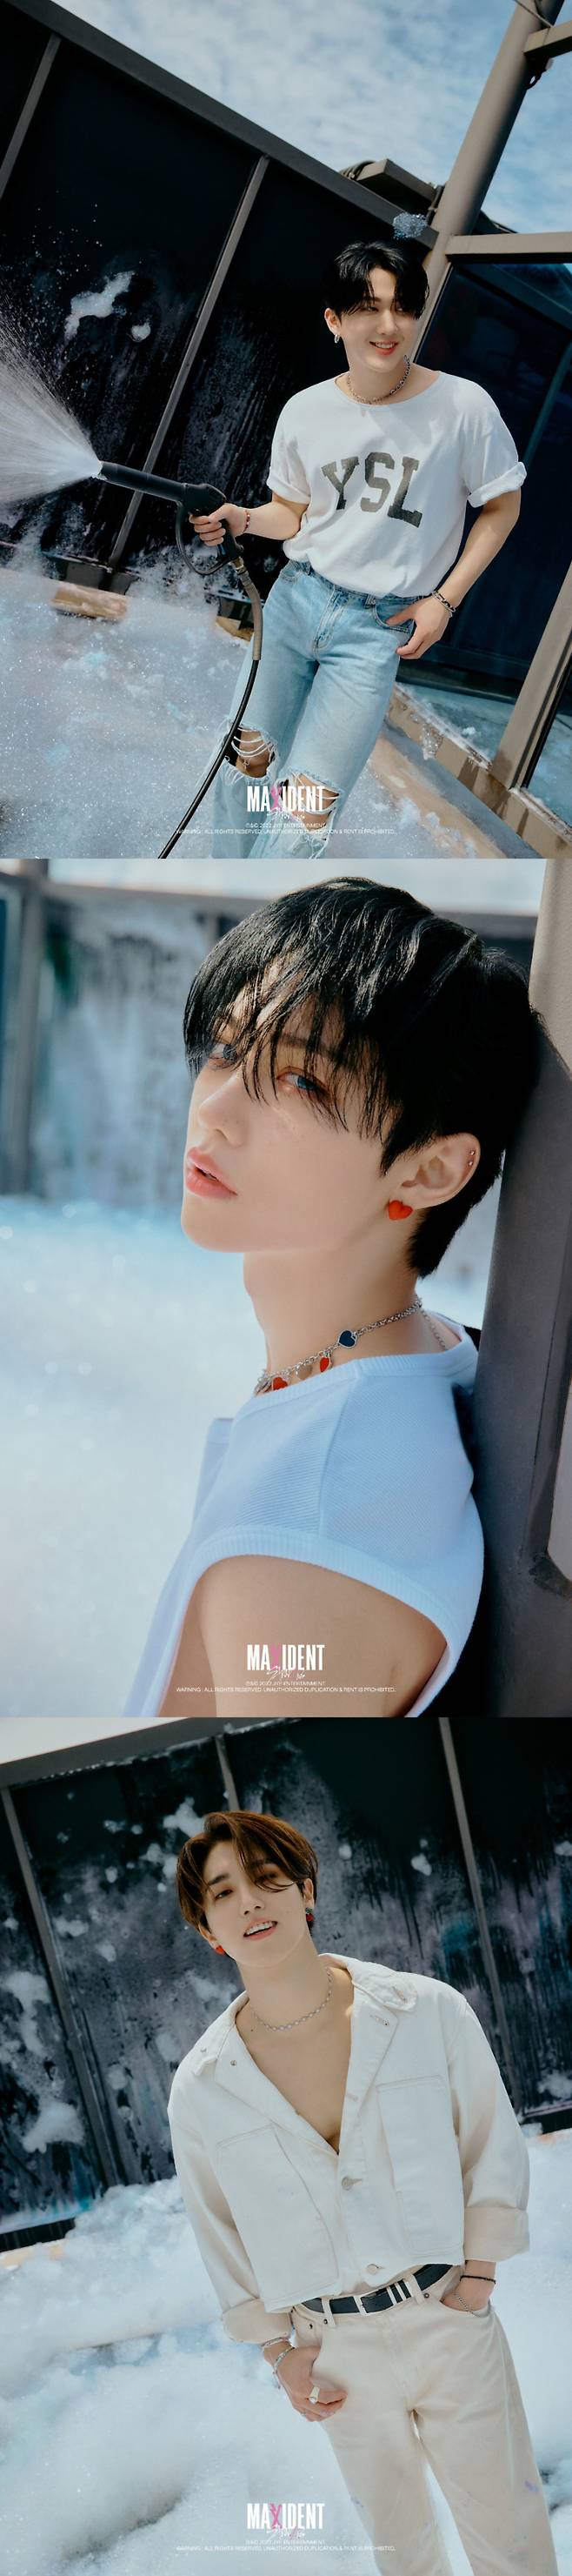 Stray Kids will release their new mini album MAXIDENT and the title song CASE 143 (Case 143) at 1 p.m. on October 7.On the 24th, he presented eight personal images at midnight.The new song CASE 143 is a love song that Stray Kids is the first to show as a title song.I likened the feelings of love to event occurrence and there were witty expressions unique to Stray Kids throughout the song.The groups production team, Three Lacha (3RACHA), wrote and composed by Bang Chan, Chang Bin and Han to enhance musical perfection.Meanwhile, Stray Kids will release their new mini-album MAXIDENT and the title track CASE 143 at 1 p.m. on October 7 (00:00 as of Eastern time in the United States).